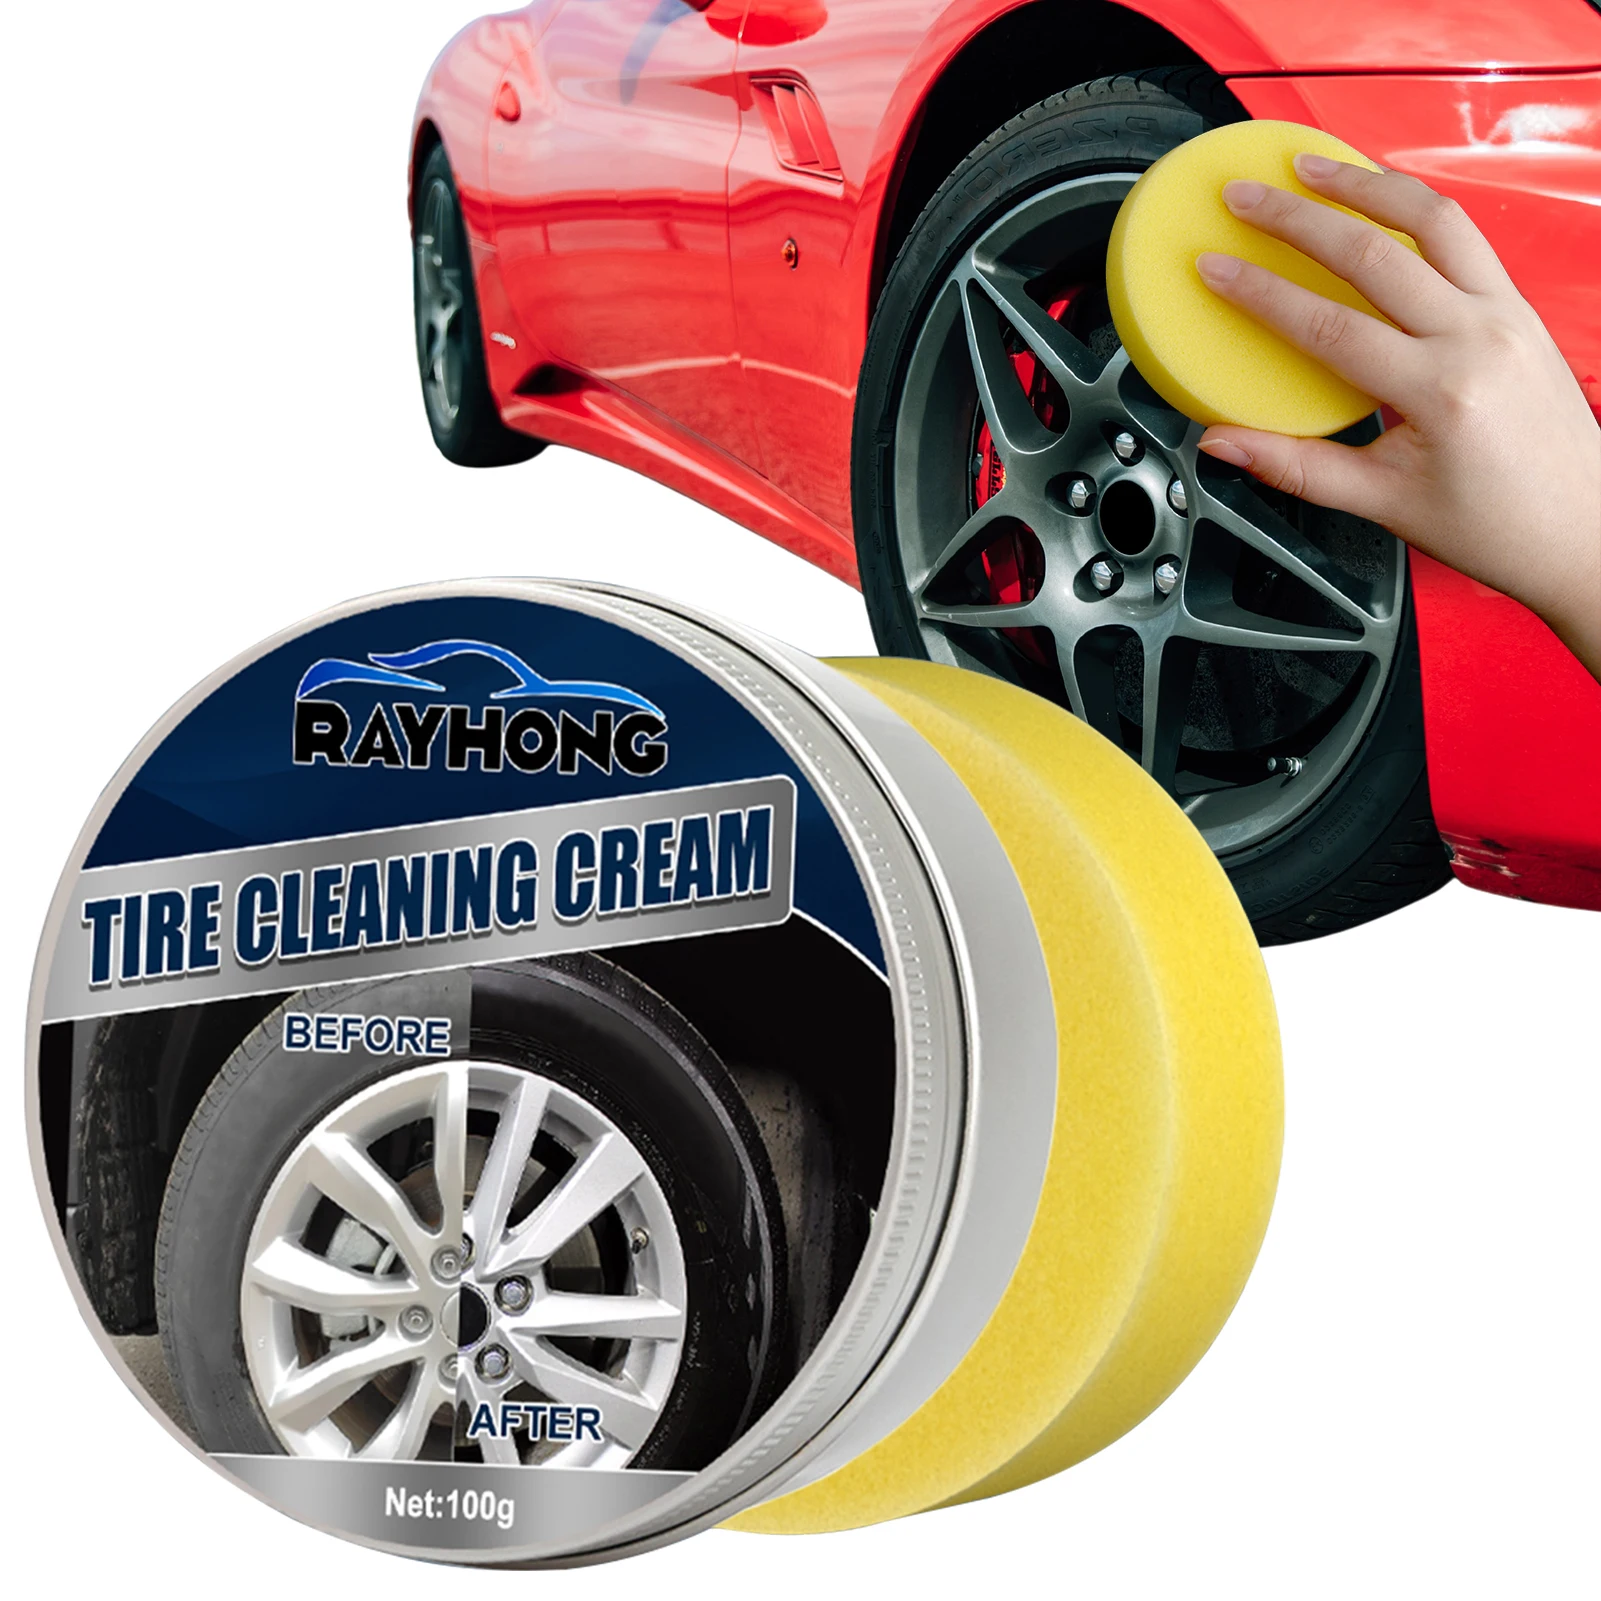 

Car Tire Cleaning Cream Tire Dressing Cleaning Paste With Sponge Cleaning Tools For Tires Wheels Rubber Tire Shine For Cars